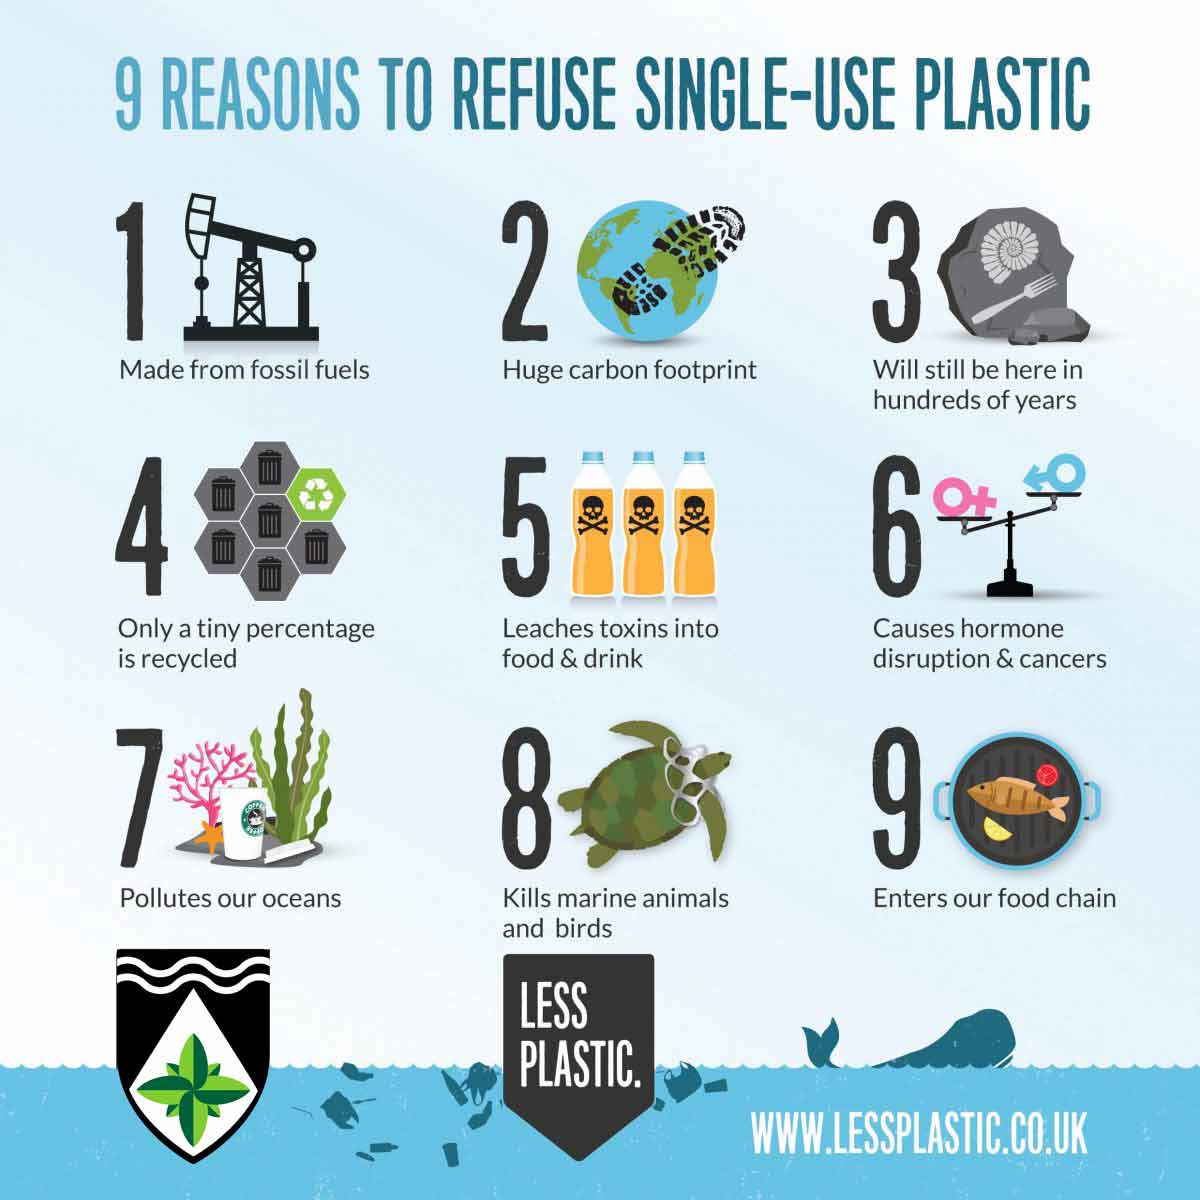 9-reasons-to-refuse-single-use-plastic_square-1200x1200-op